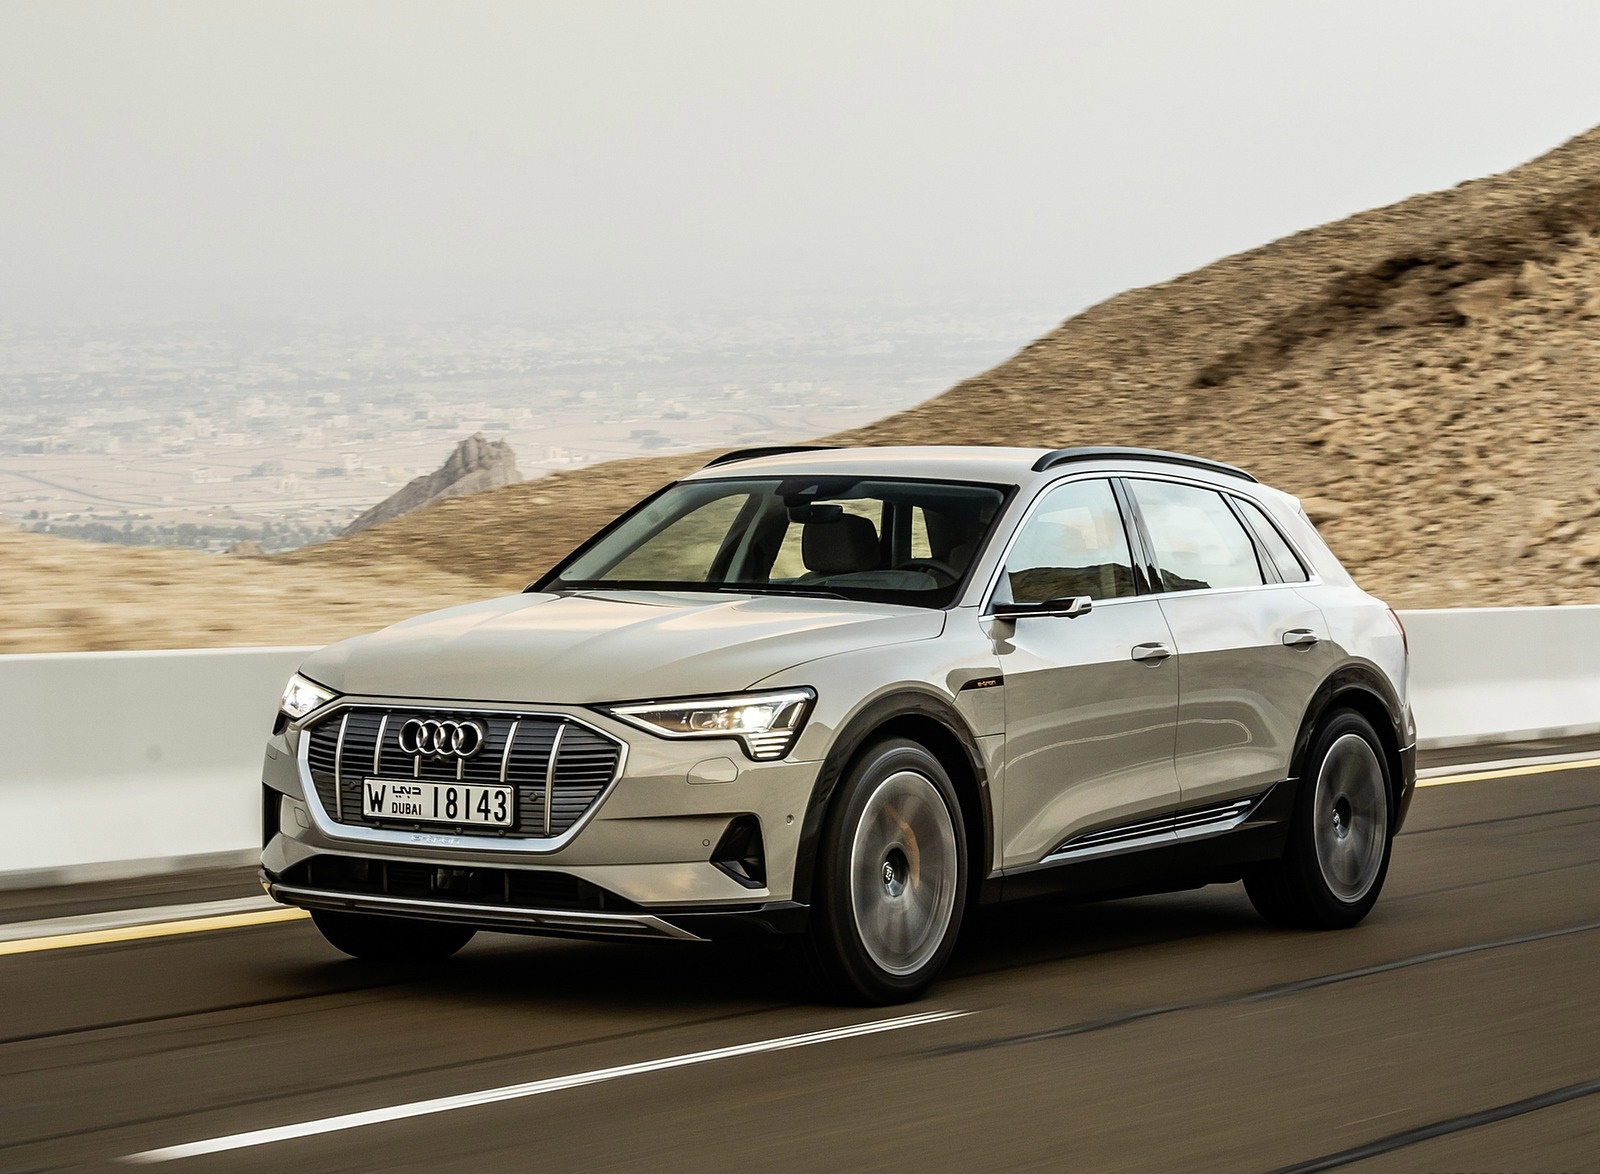 2019 Audi e-tron (Color: Siam Beige) Front Three-Quarter Wallpapers #150 of 234